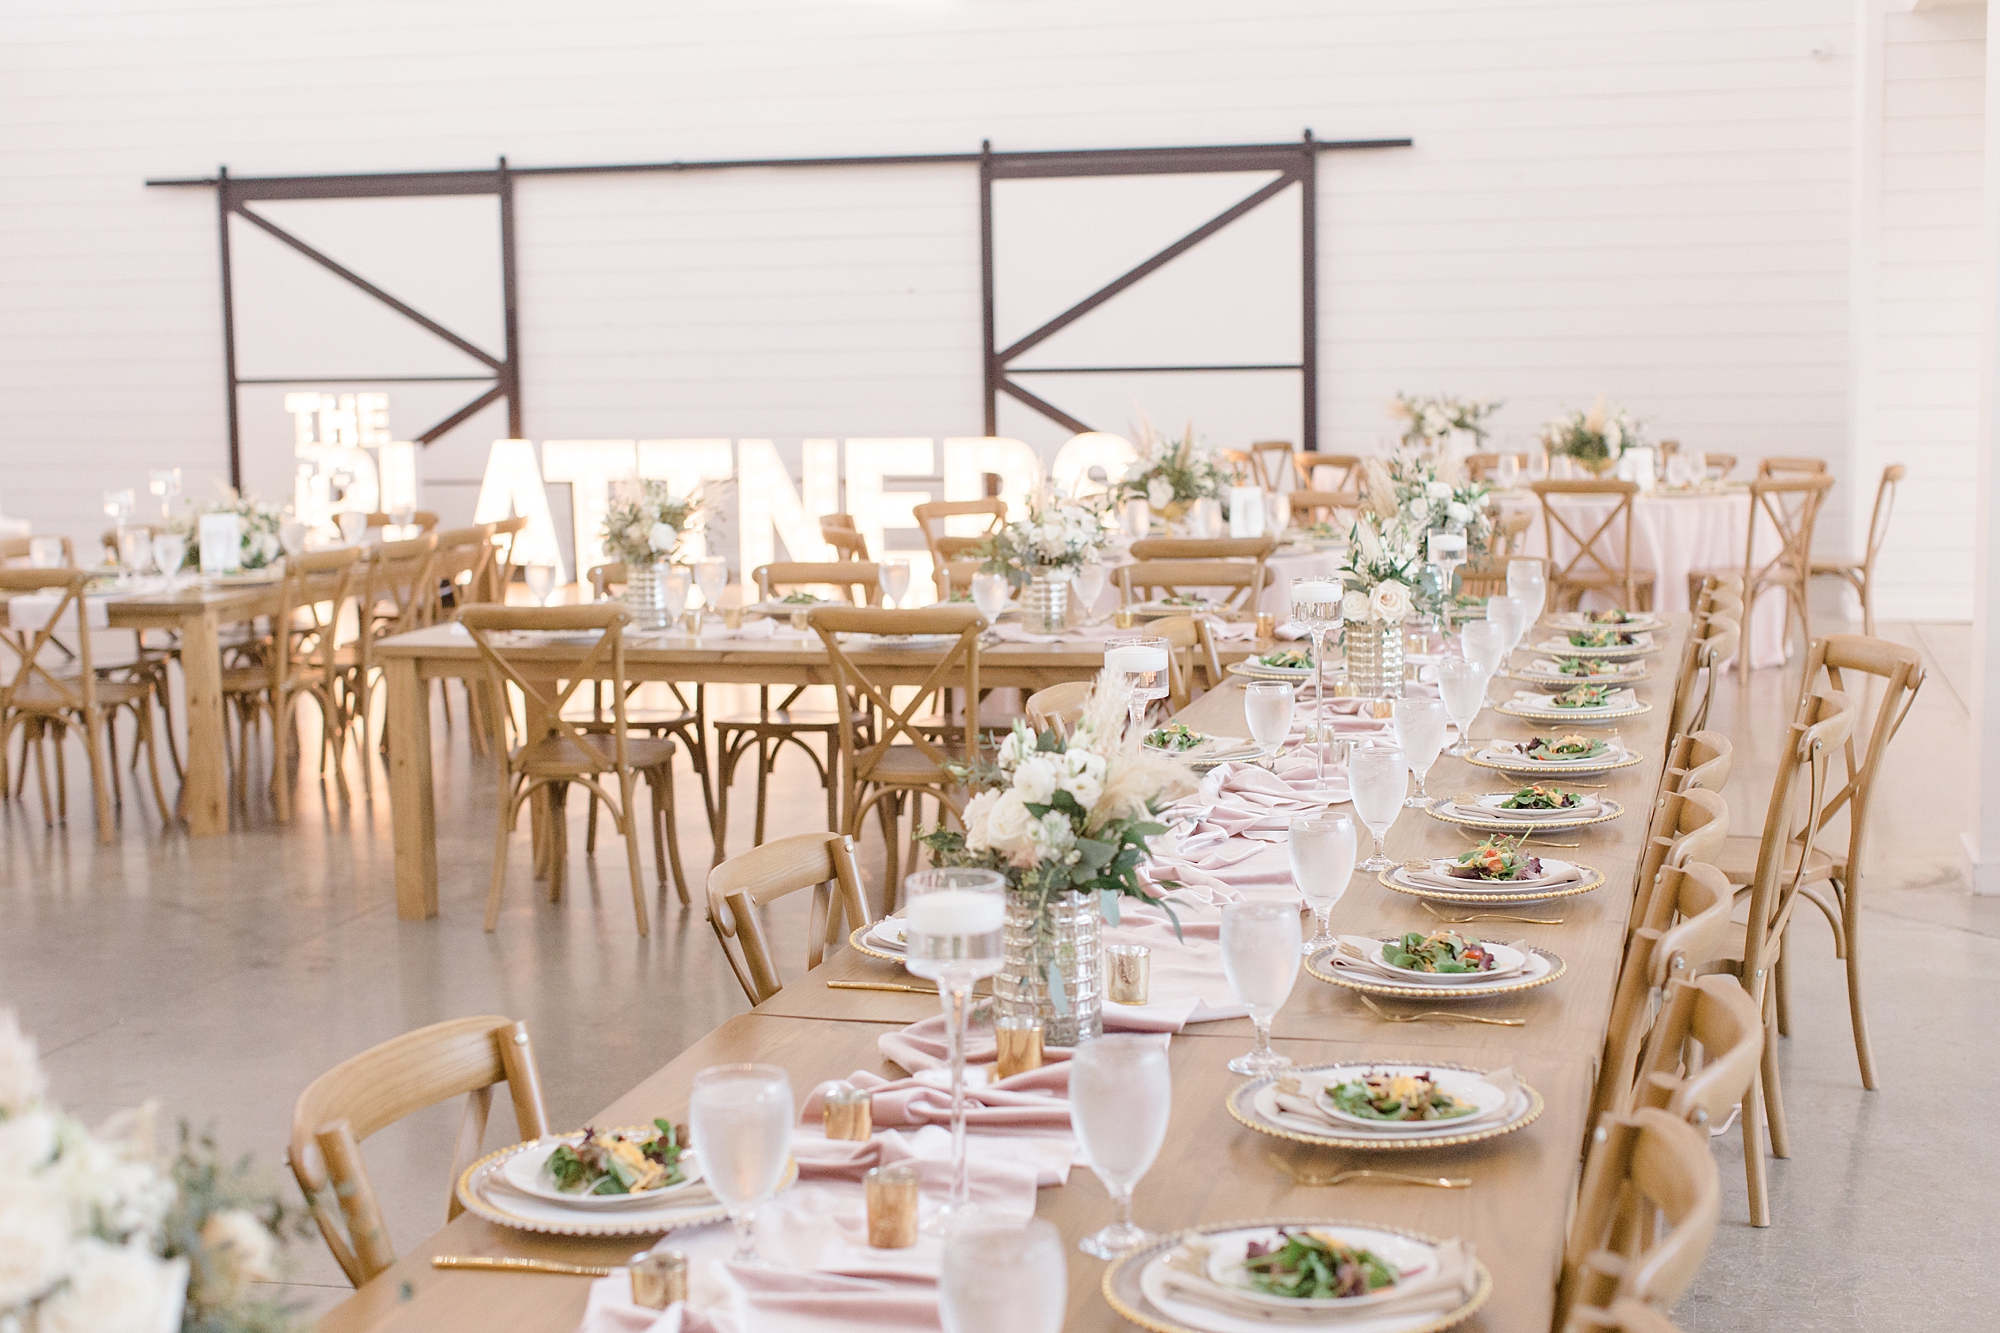 The Gardenia wedding reception with family style seating around wooden table 